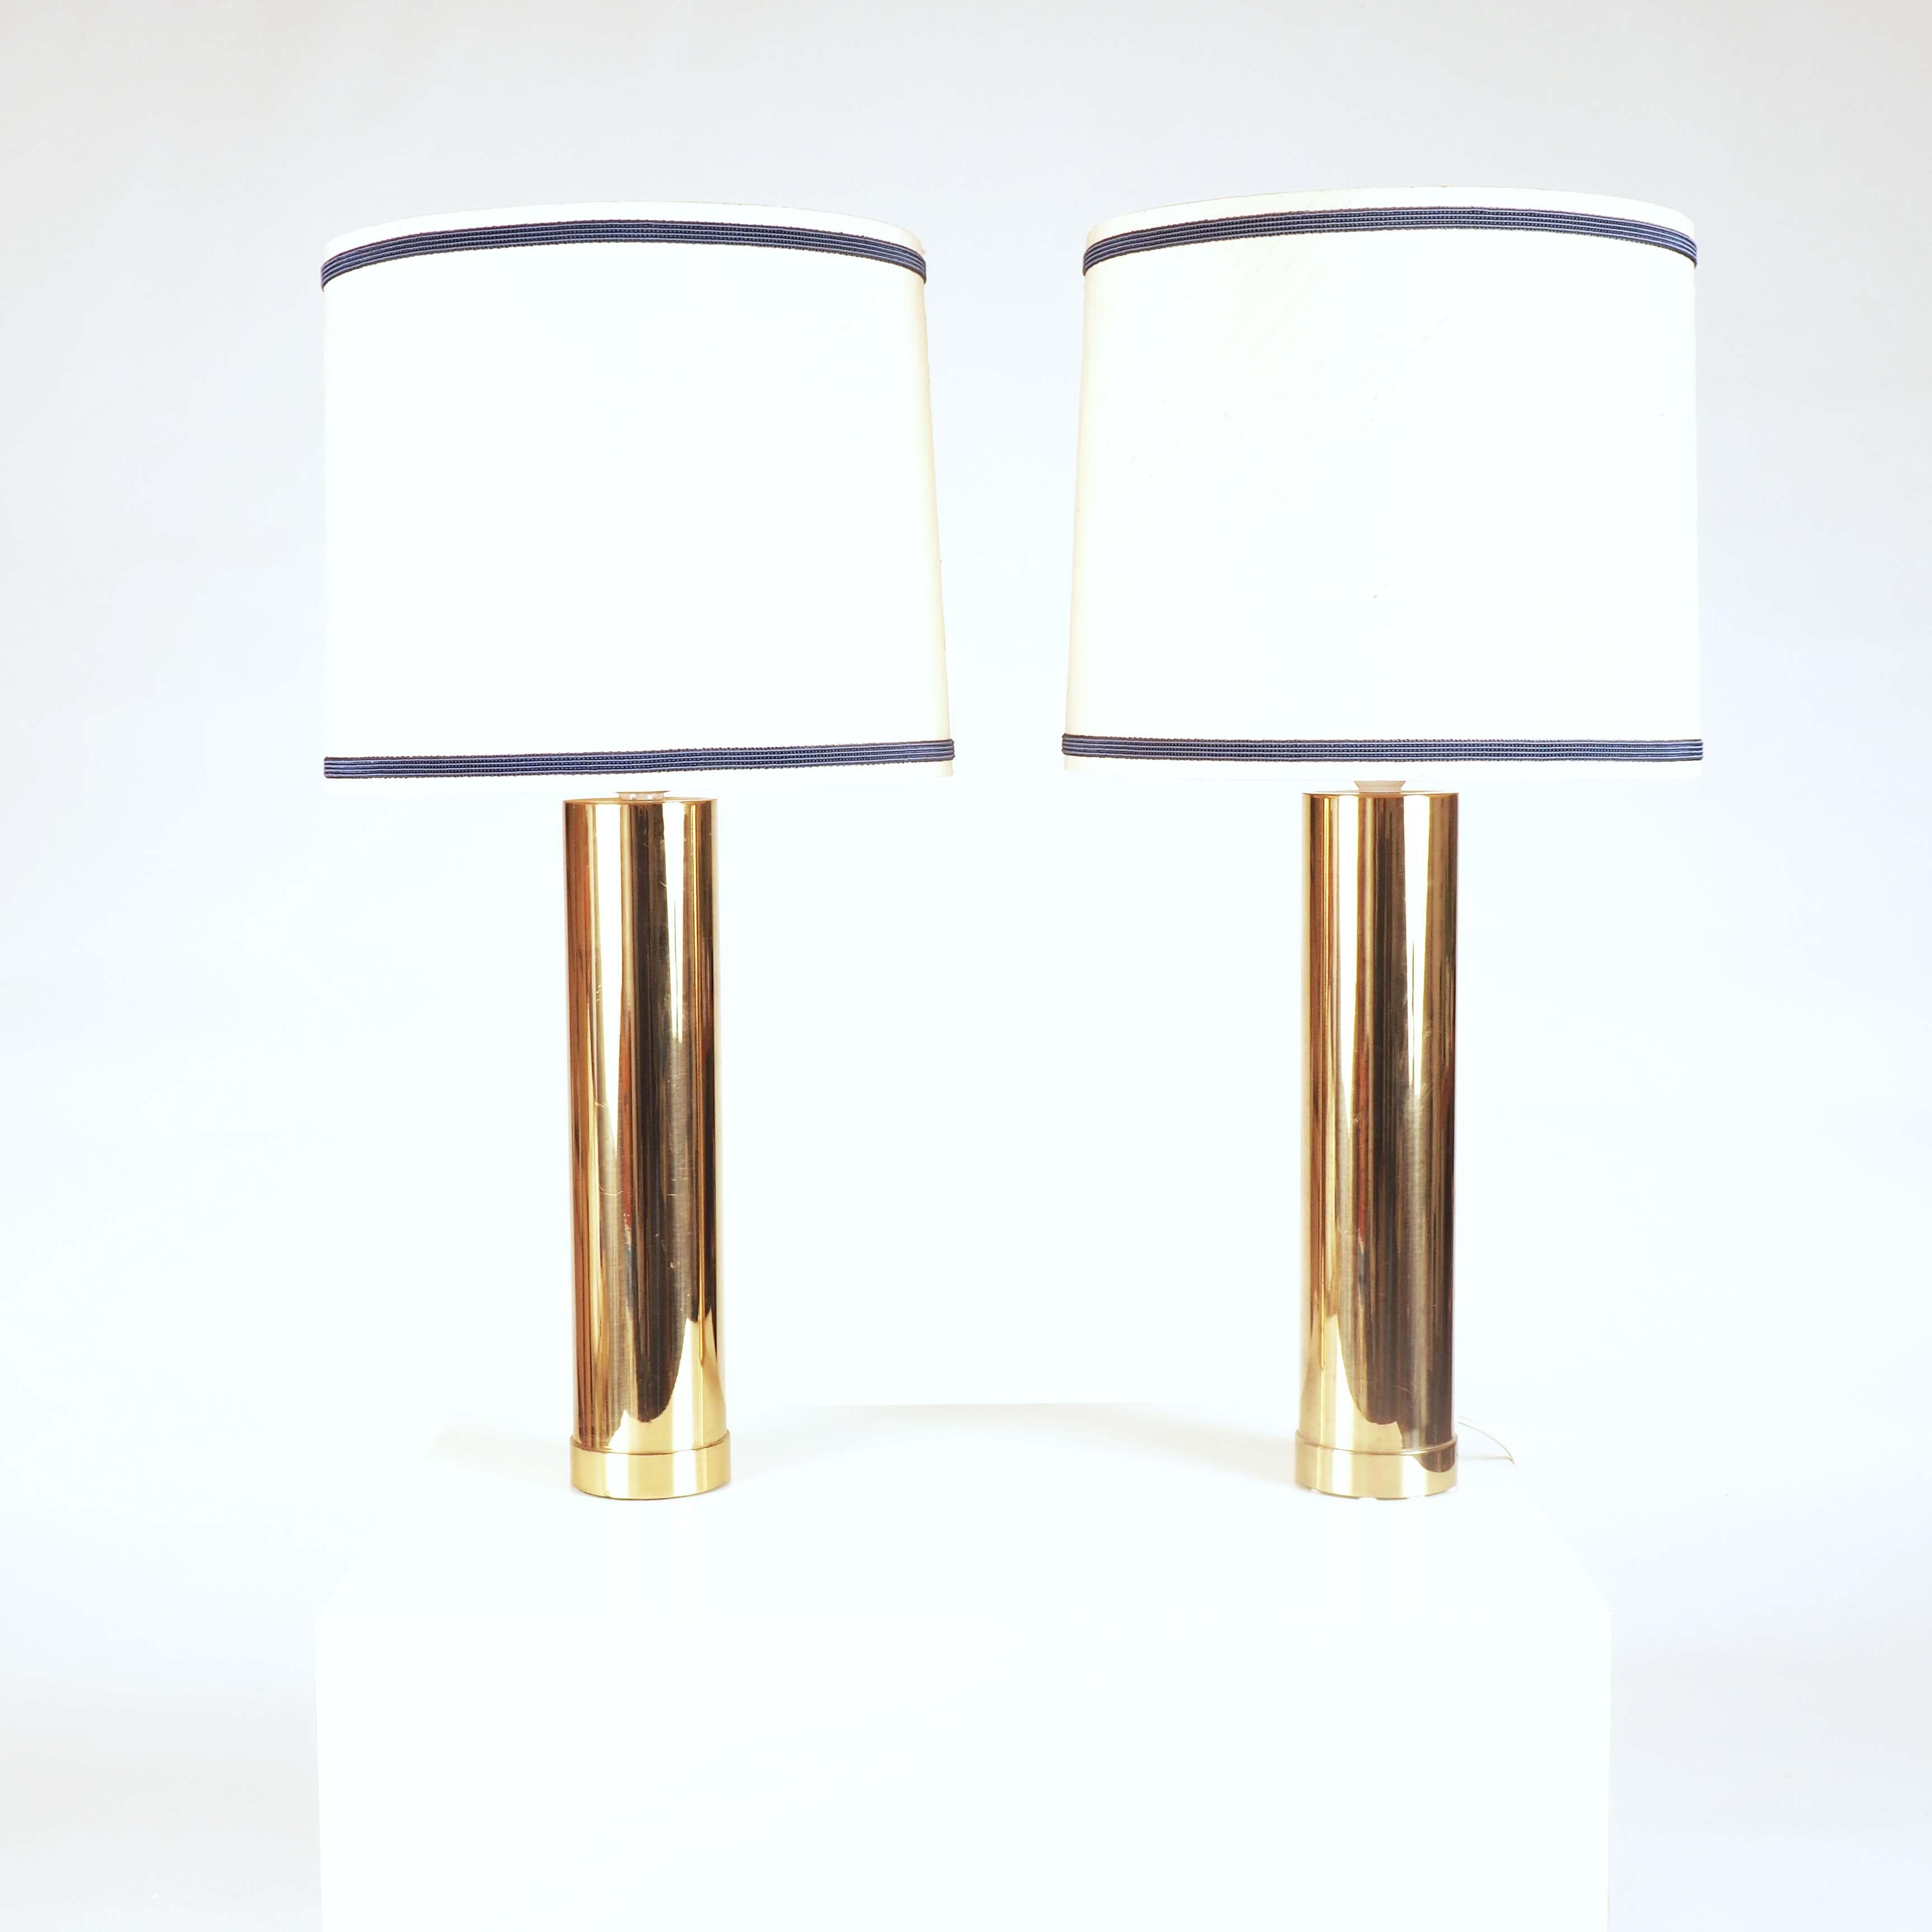 Strict and modern, this pair of table lamps was made in the sixties by the Swedish lamp maker Bergboms. The brass base with iron weight is very heavy so they give just the right solid feeling of quality in your hand. 



The original lamps